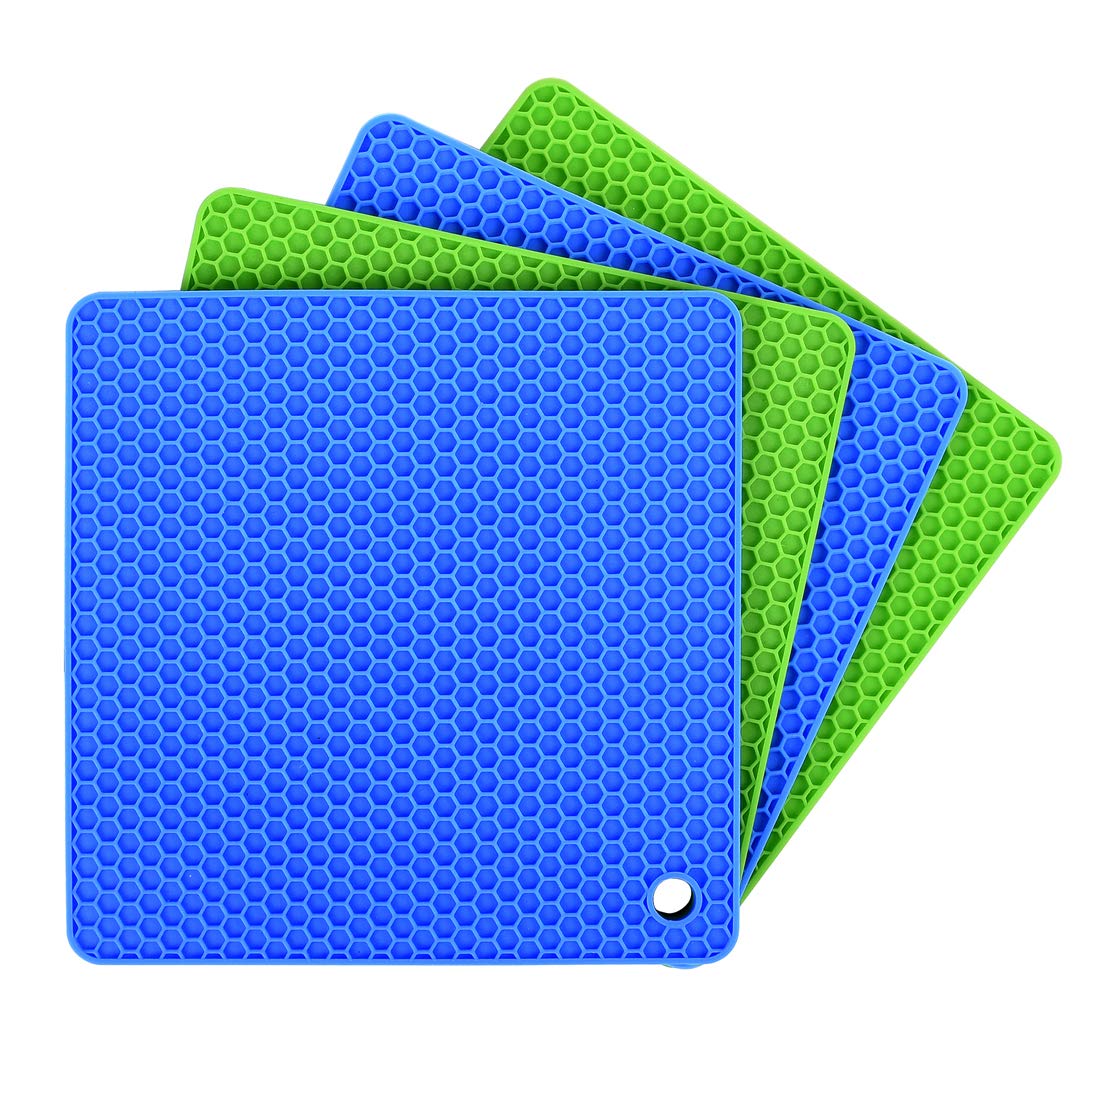 Silicone Pot Holders (Set of 4), Ankway Silicone Trivets Multi-Purpose Hot Pads Heat Resistant to 450 °F, Non-slip, Insulation, Durable, Flexible Trivet for Table Kitchen(2 Blue & 2Green)